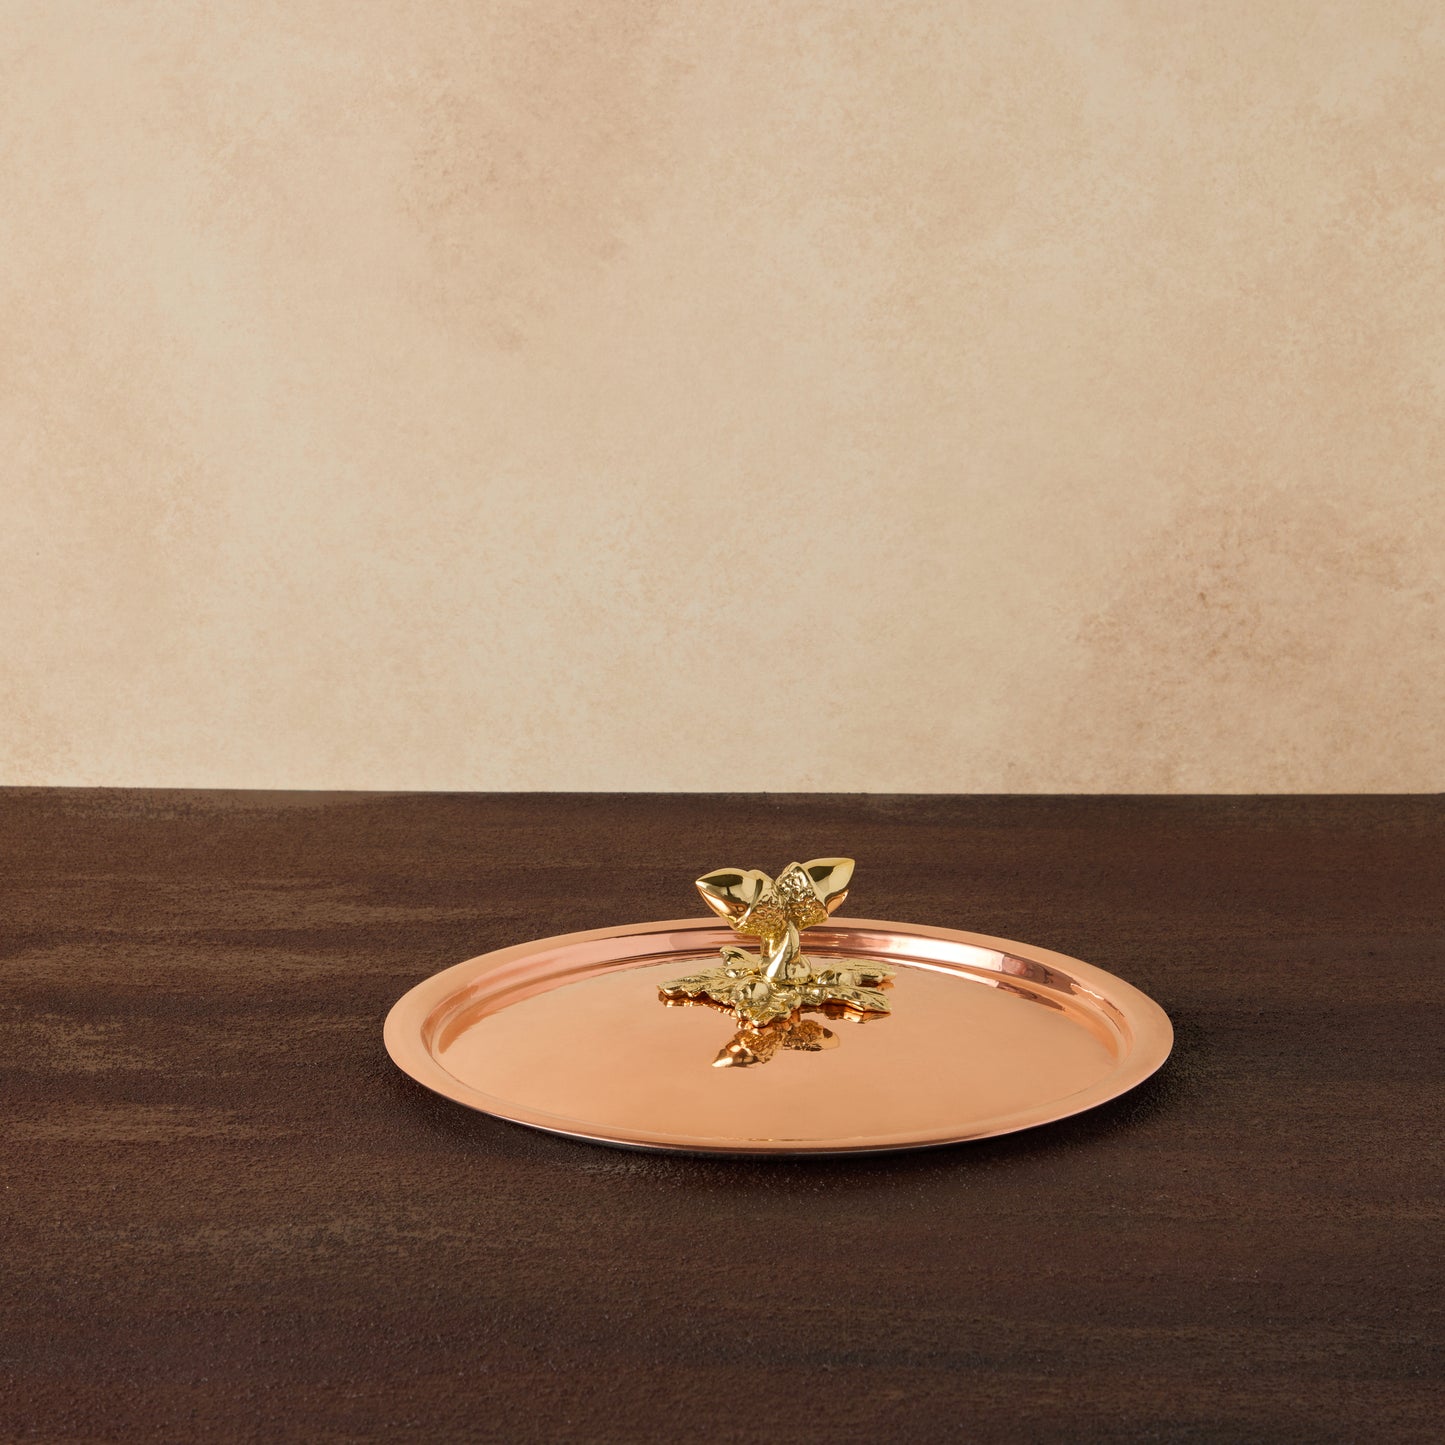 Historia 9.5" lid Crafted in beautiful copper and featuring a solid bronze acorn knob